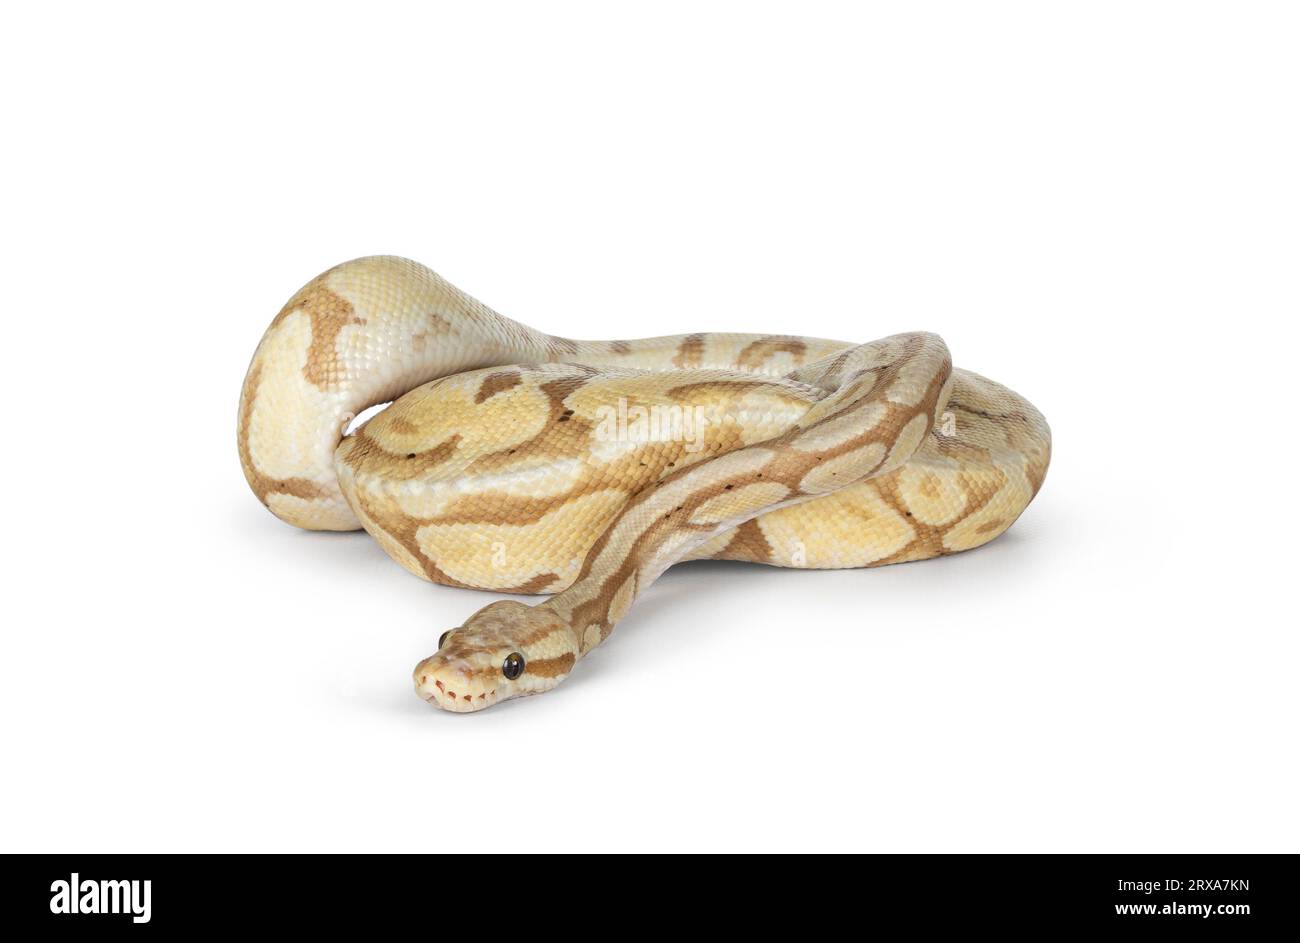 Cute yellowish ball python, curled up. Head on surface slithering to the front, looking to camera. Isolated on a white background. Stock Photo